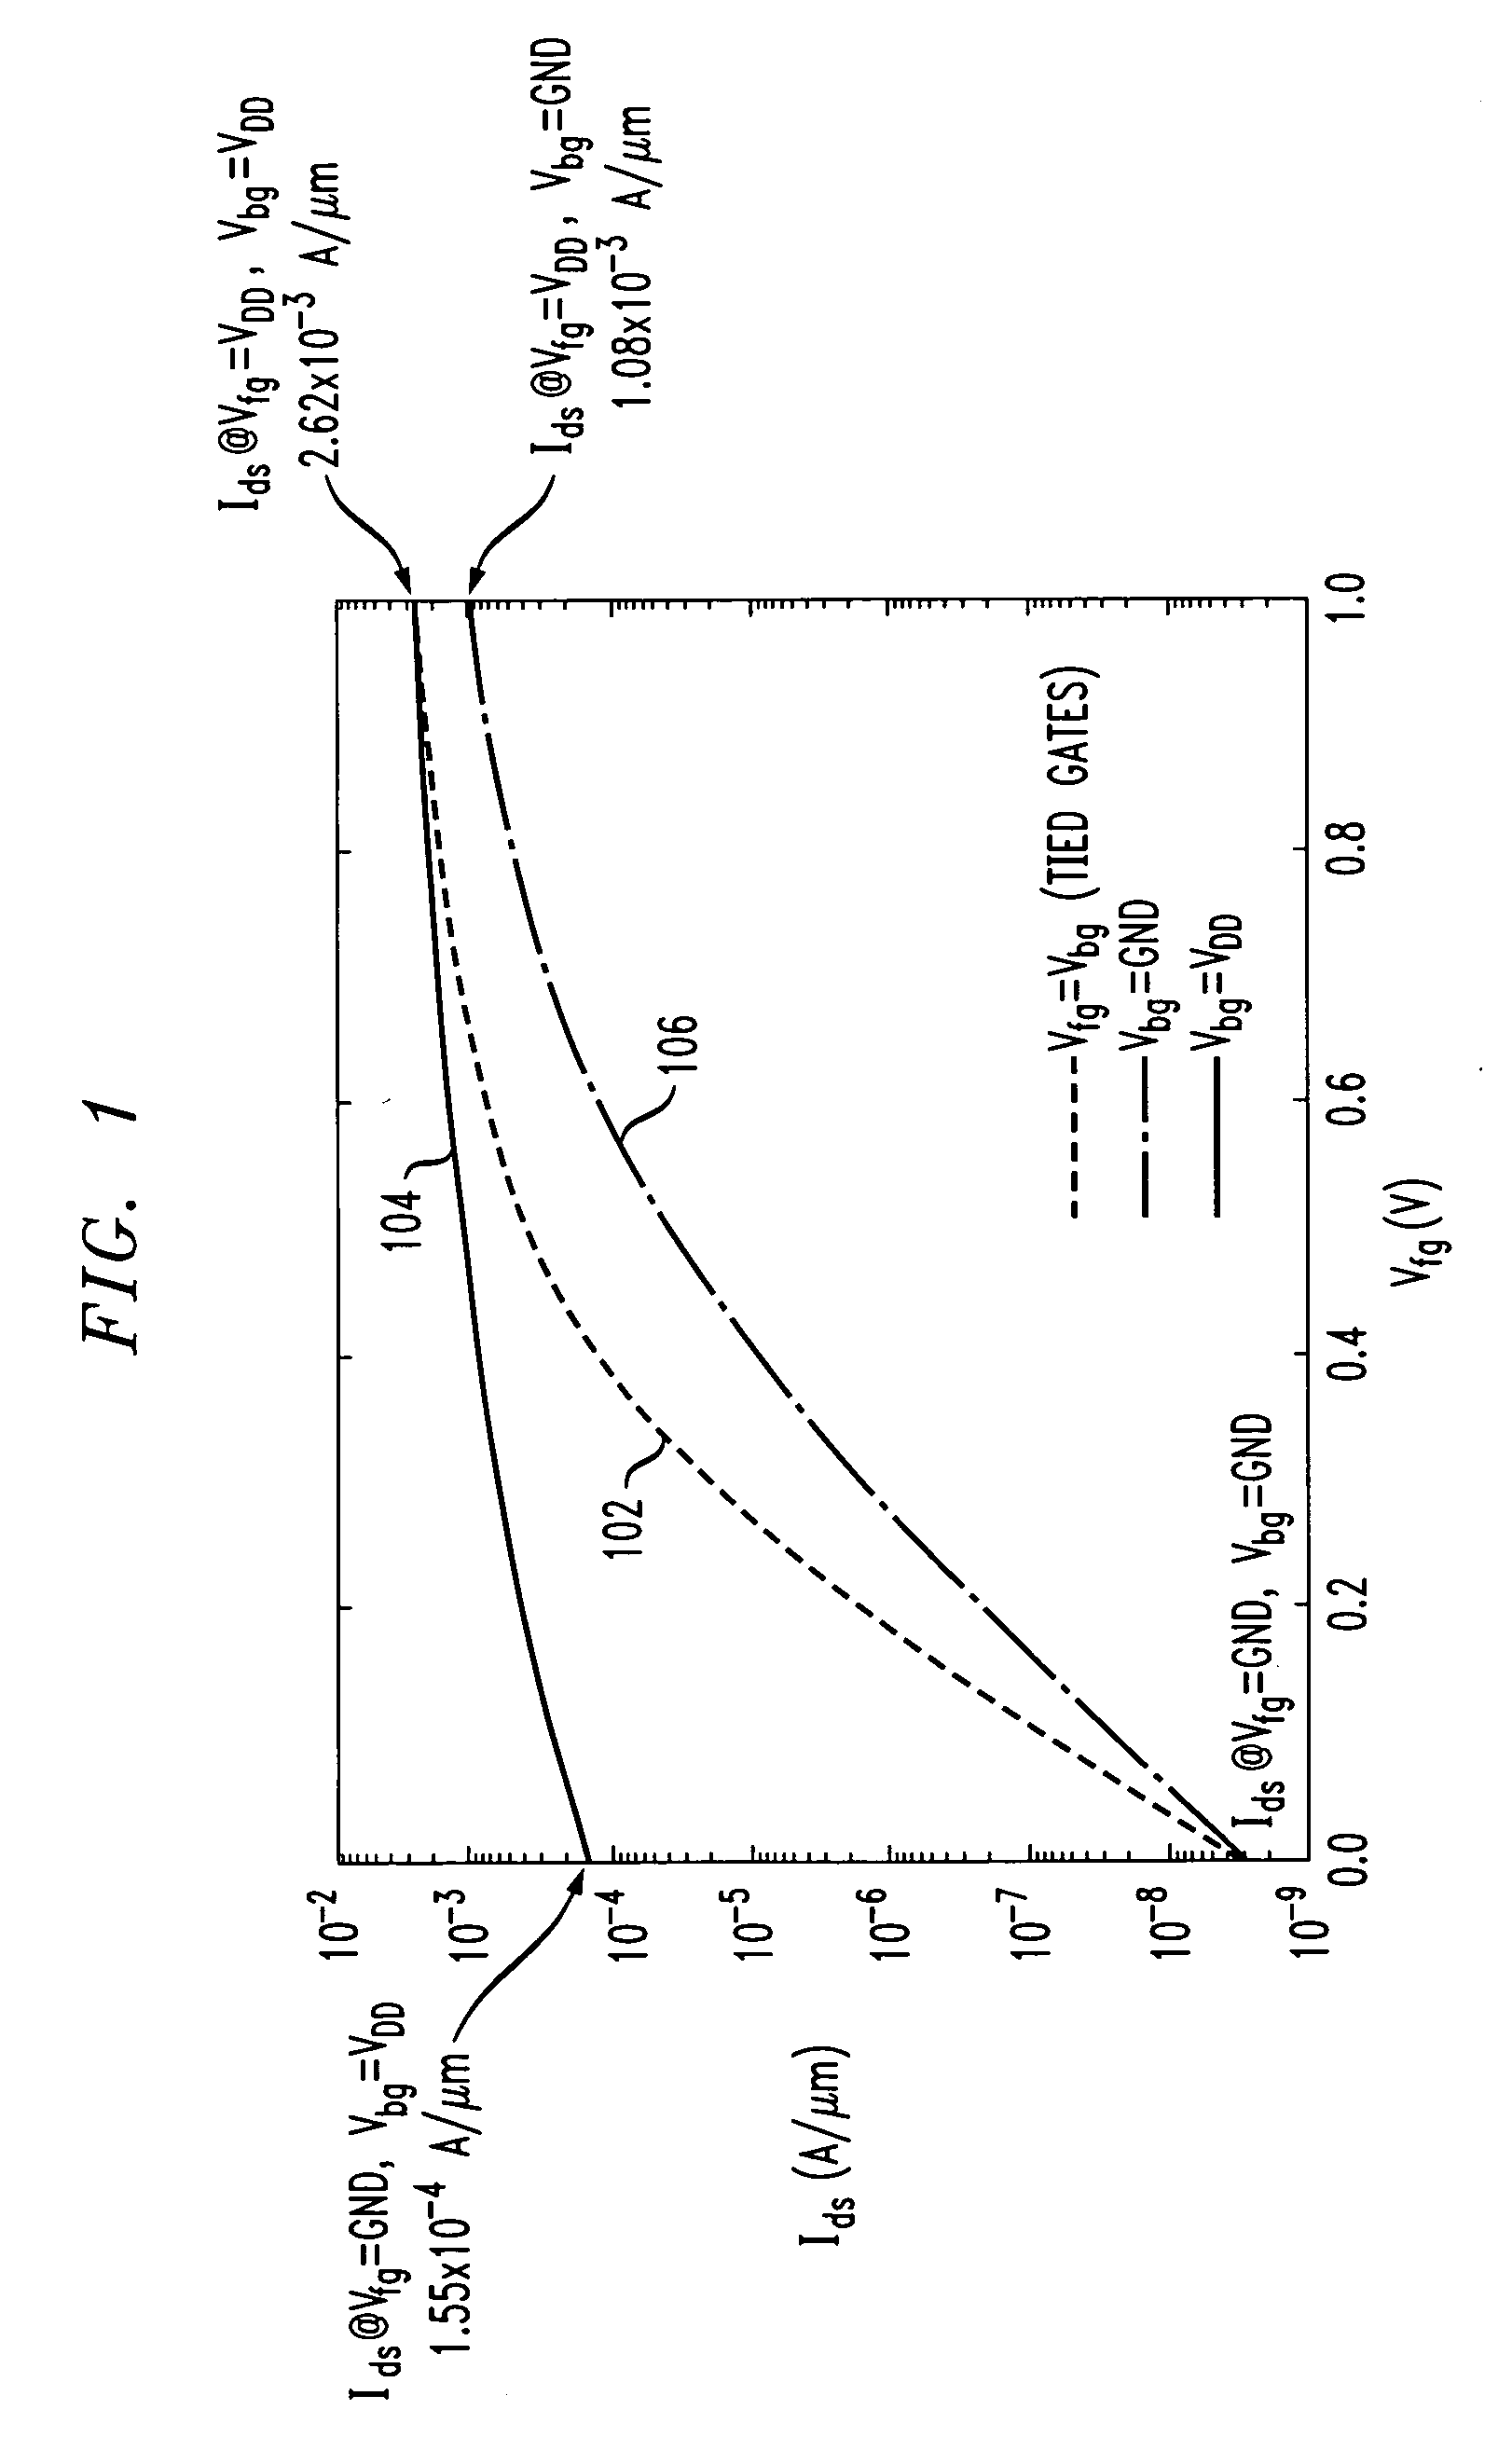 Independent-gate controlled asymmetrical memory cell and memory using the cell